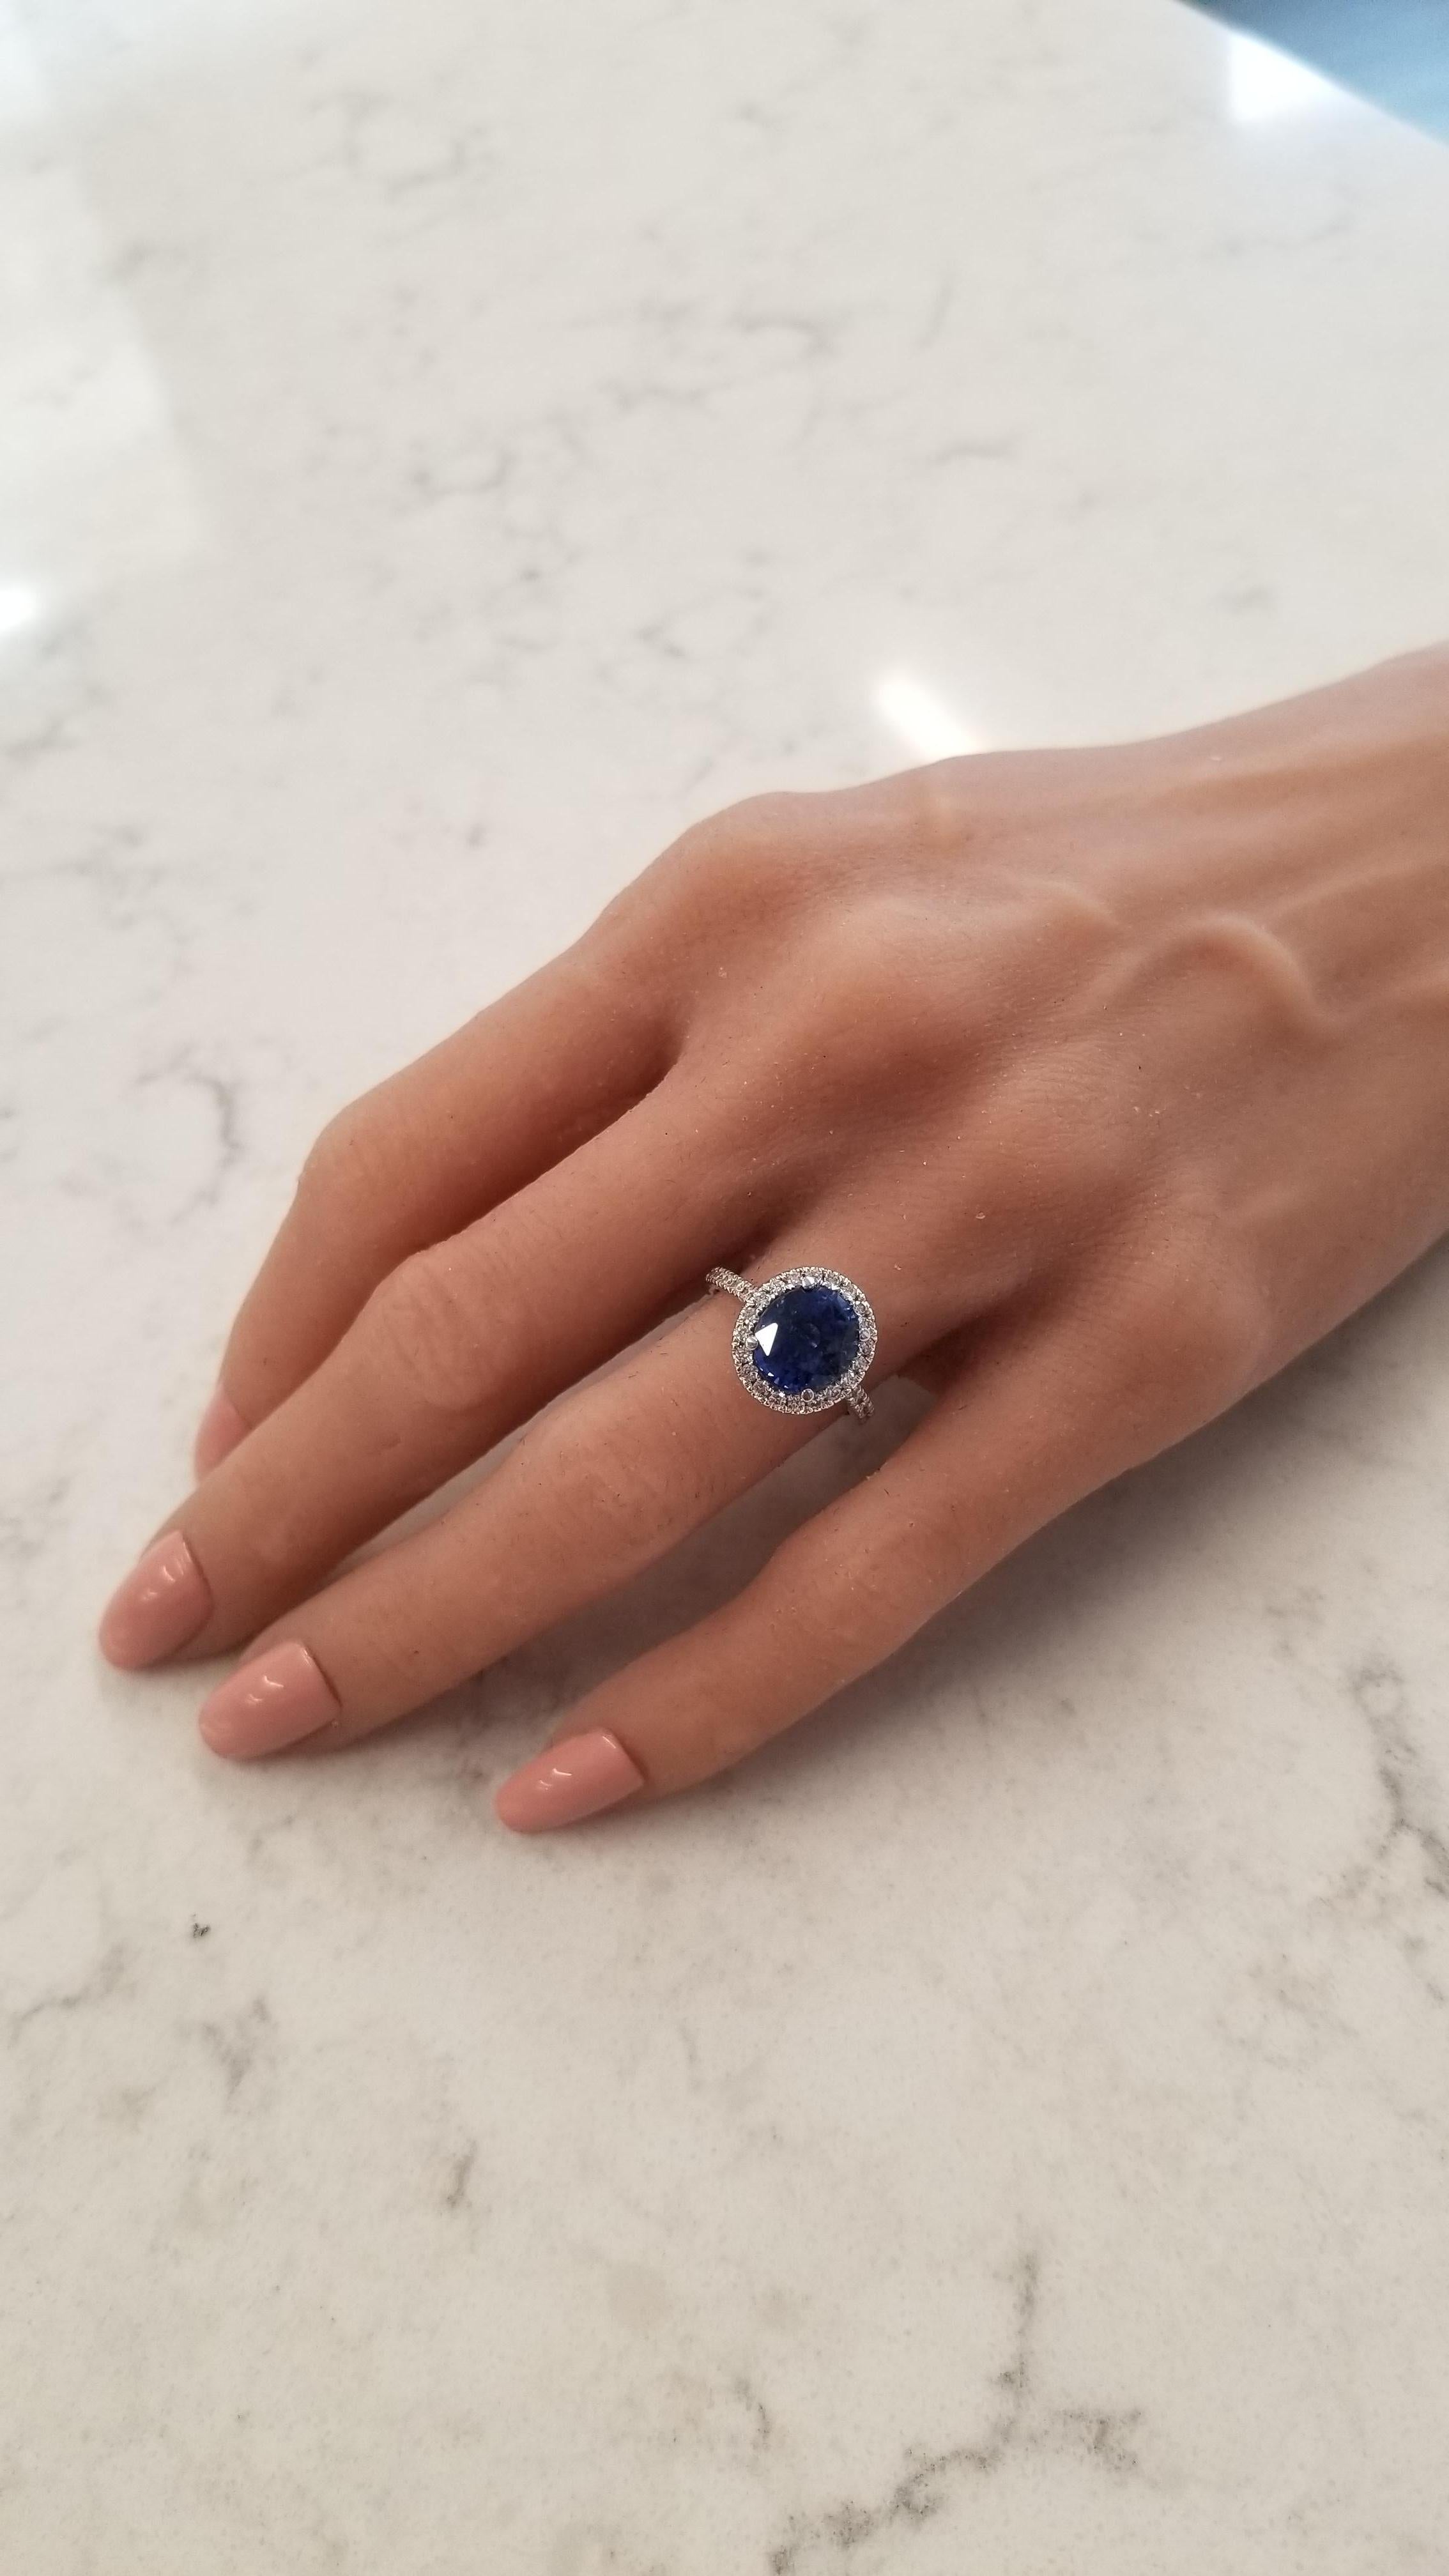 This halo ring features a brilliant cut blue sapphire that takes center stage in a prong setting with a weight of 4.02 carats and measures 9.36x8.34mm. The gem source is Sri Lanka; its color is royal blue; its transparency and luster are excellent.